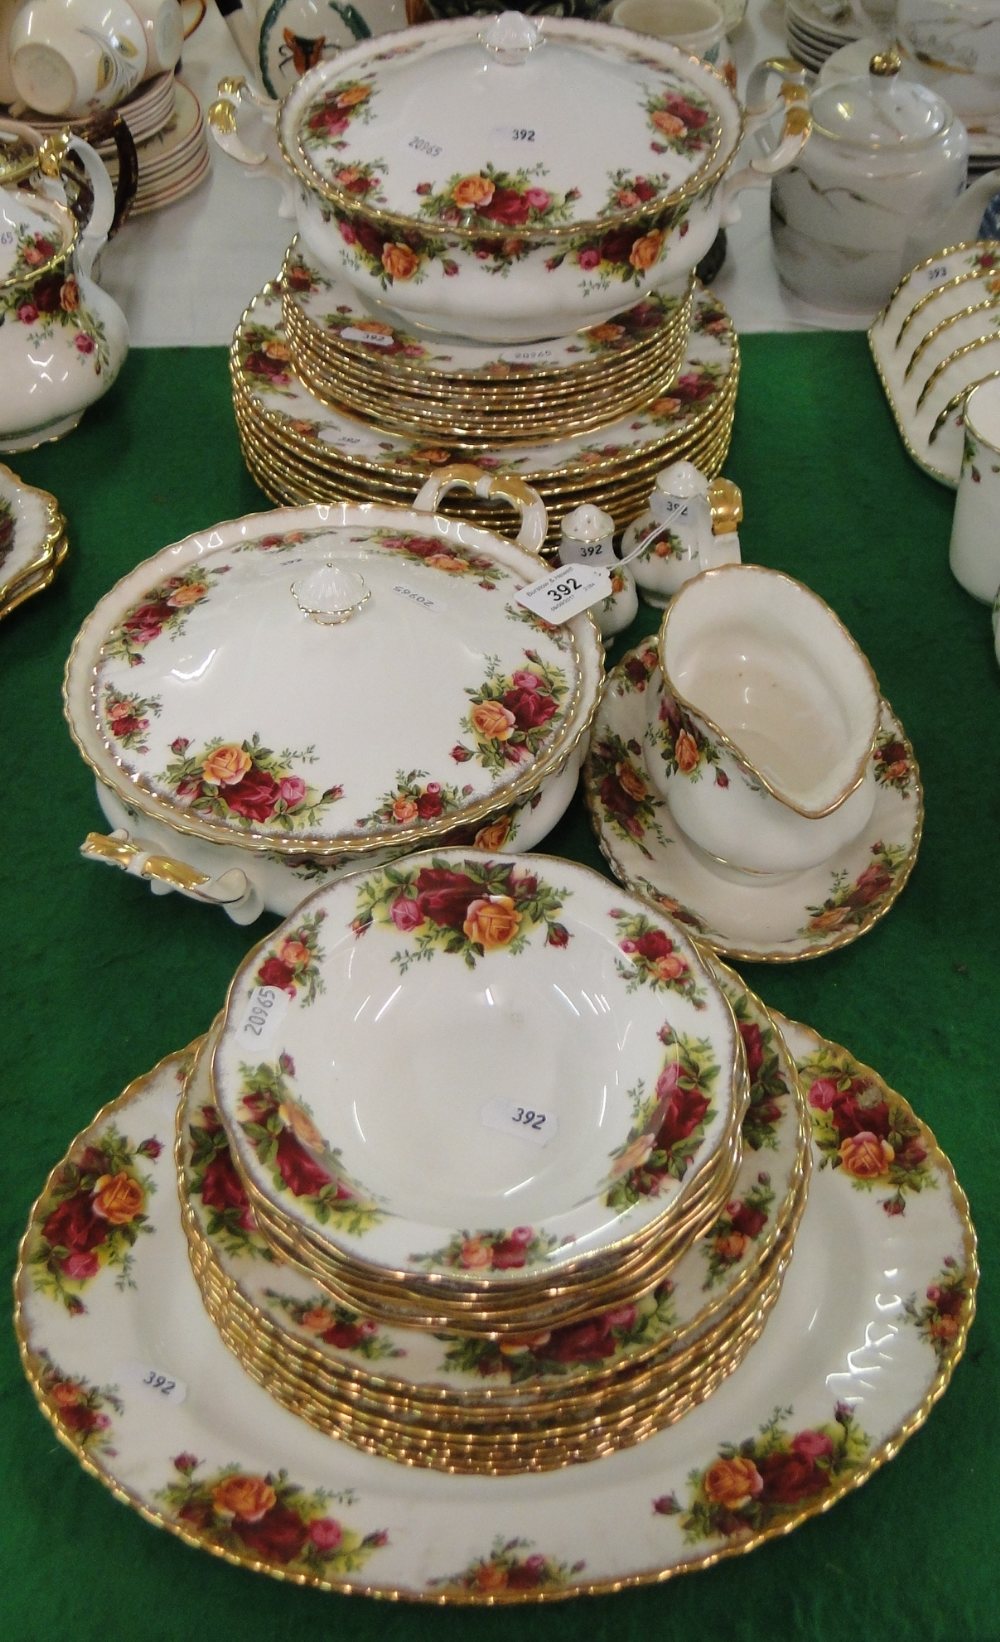 Royal Albert "Old Country Roses" dinner service including 2 vegetable tureens.